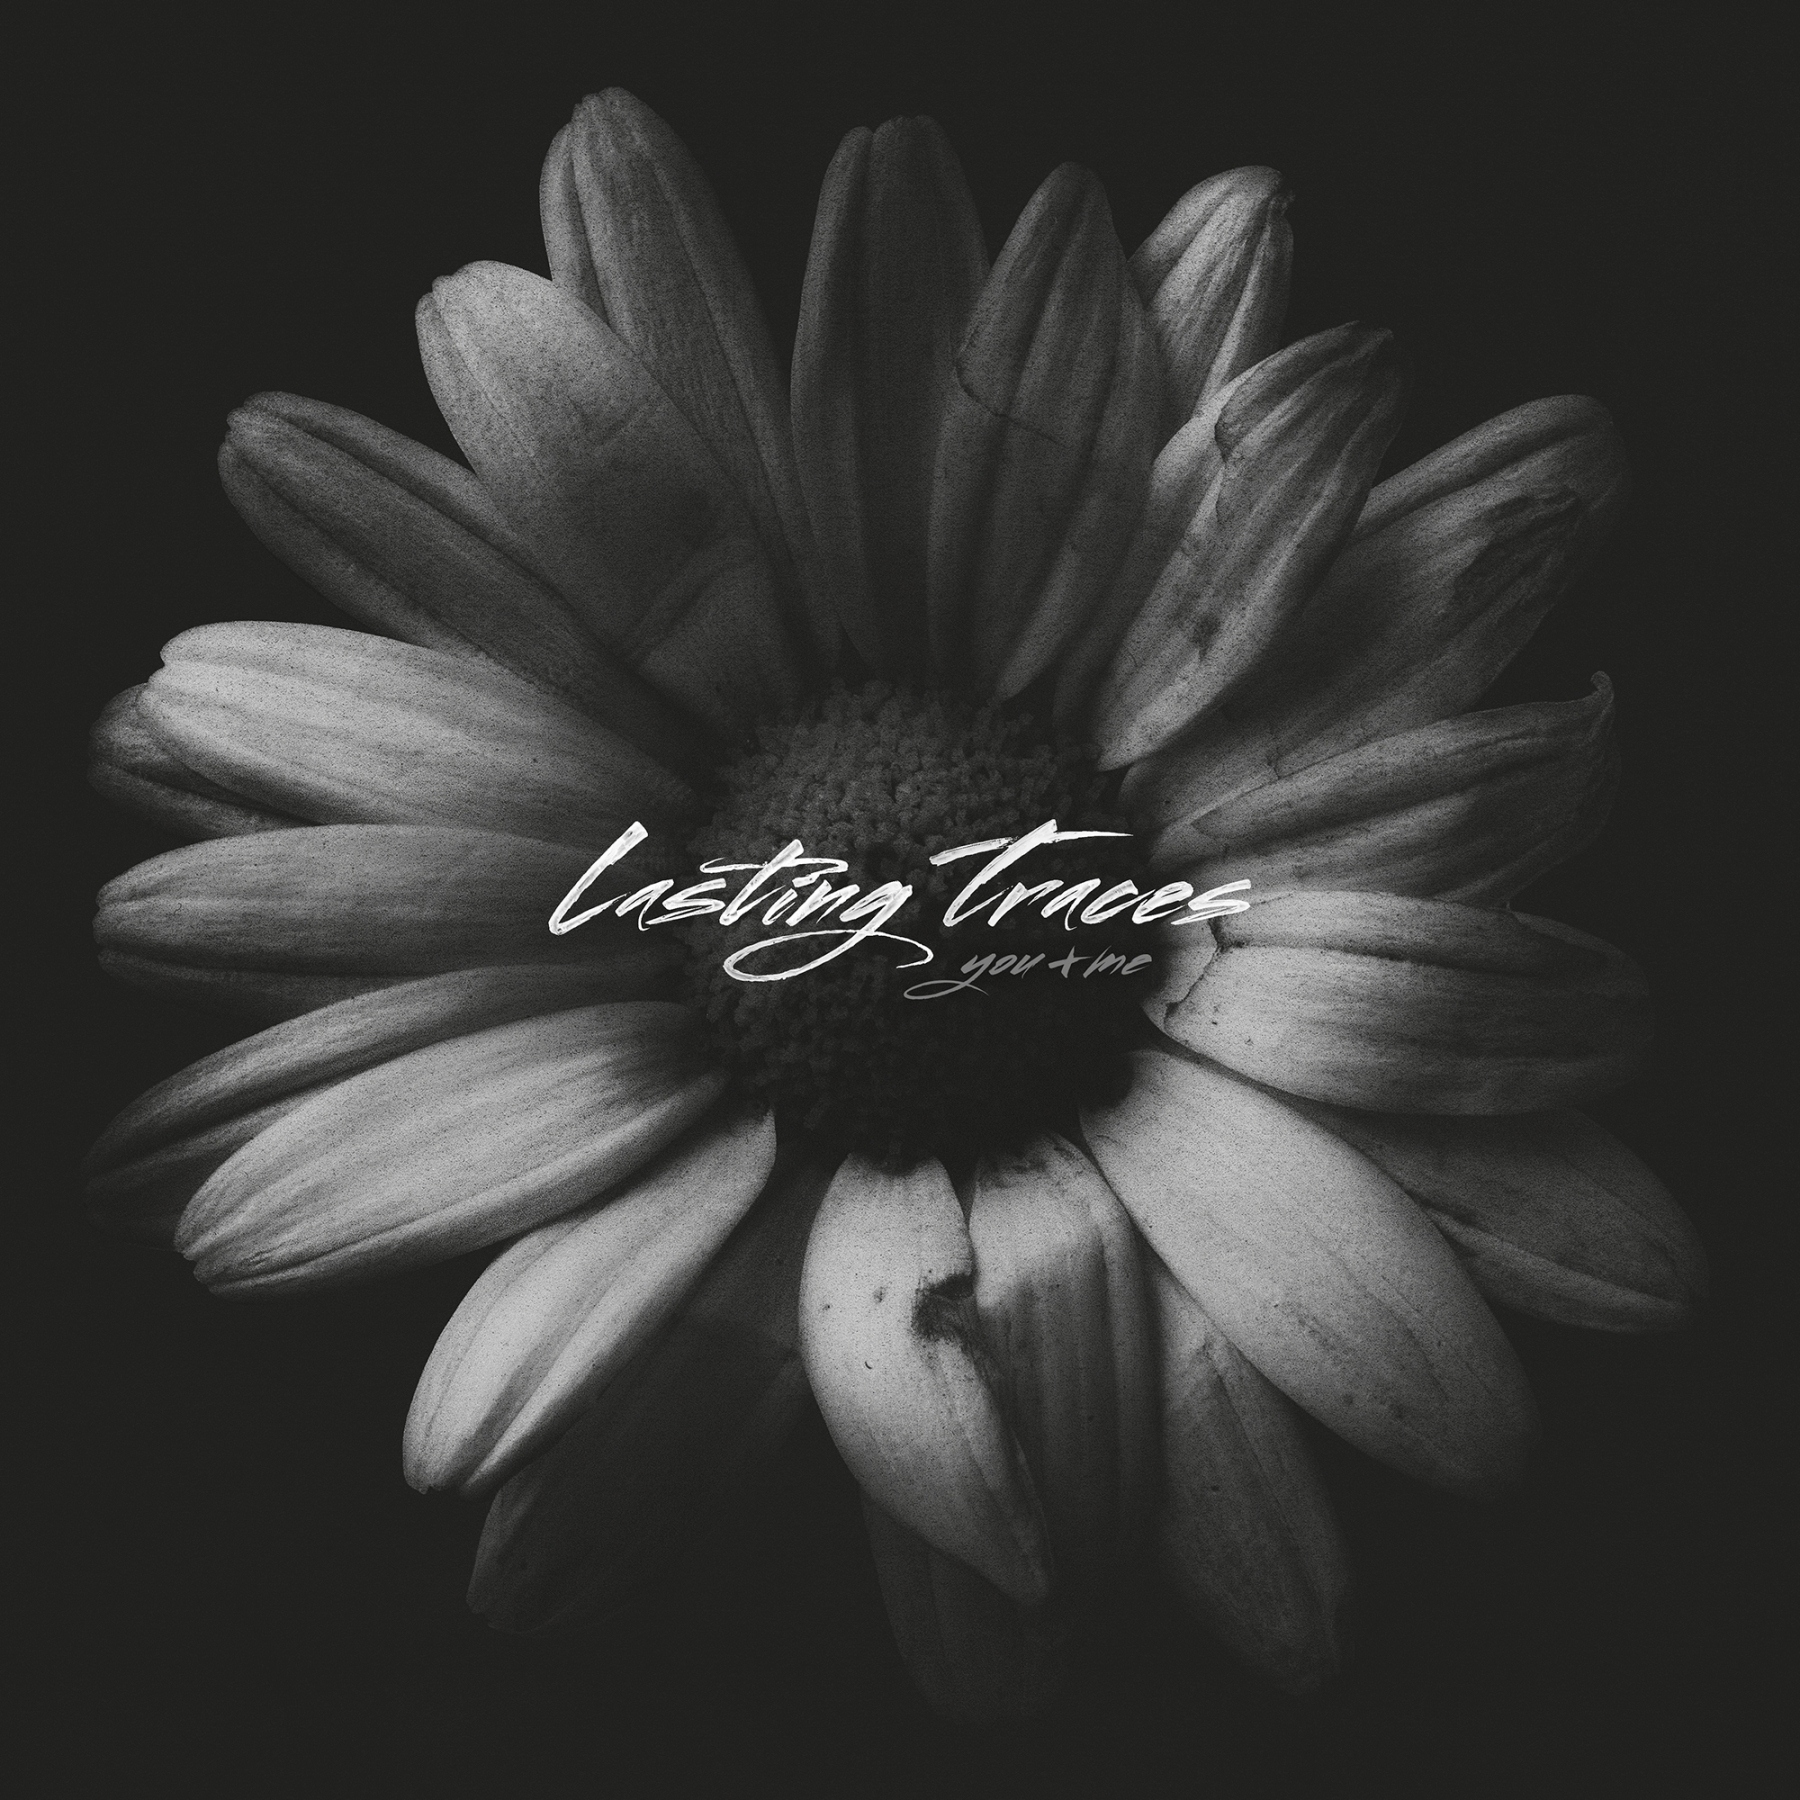 Lasting Traces - You+Me (2015)